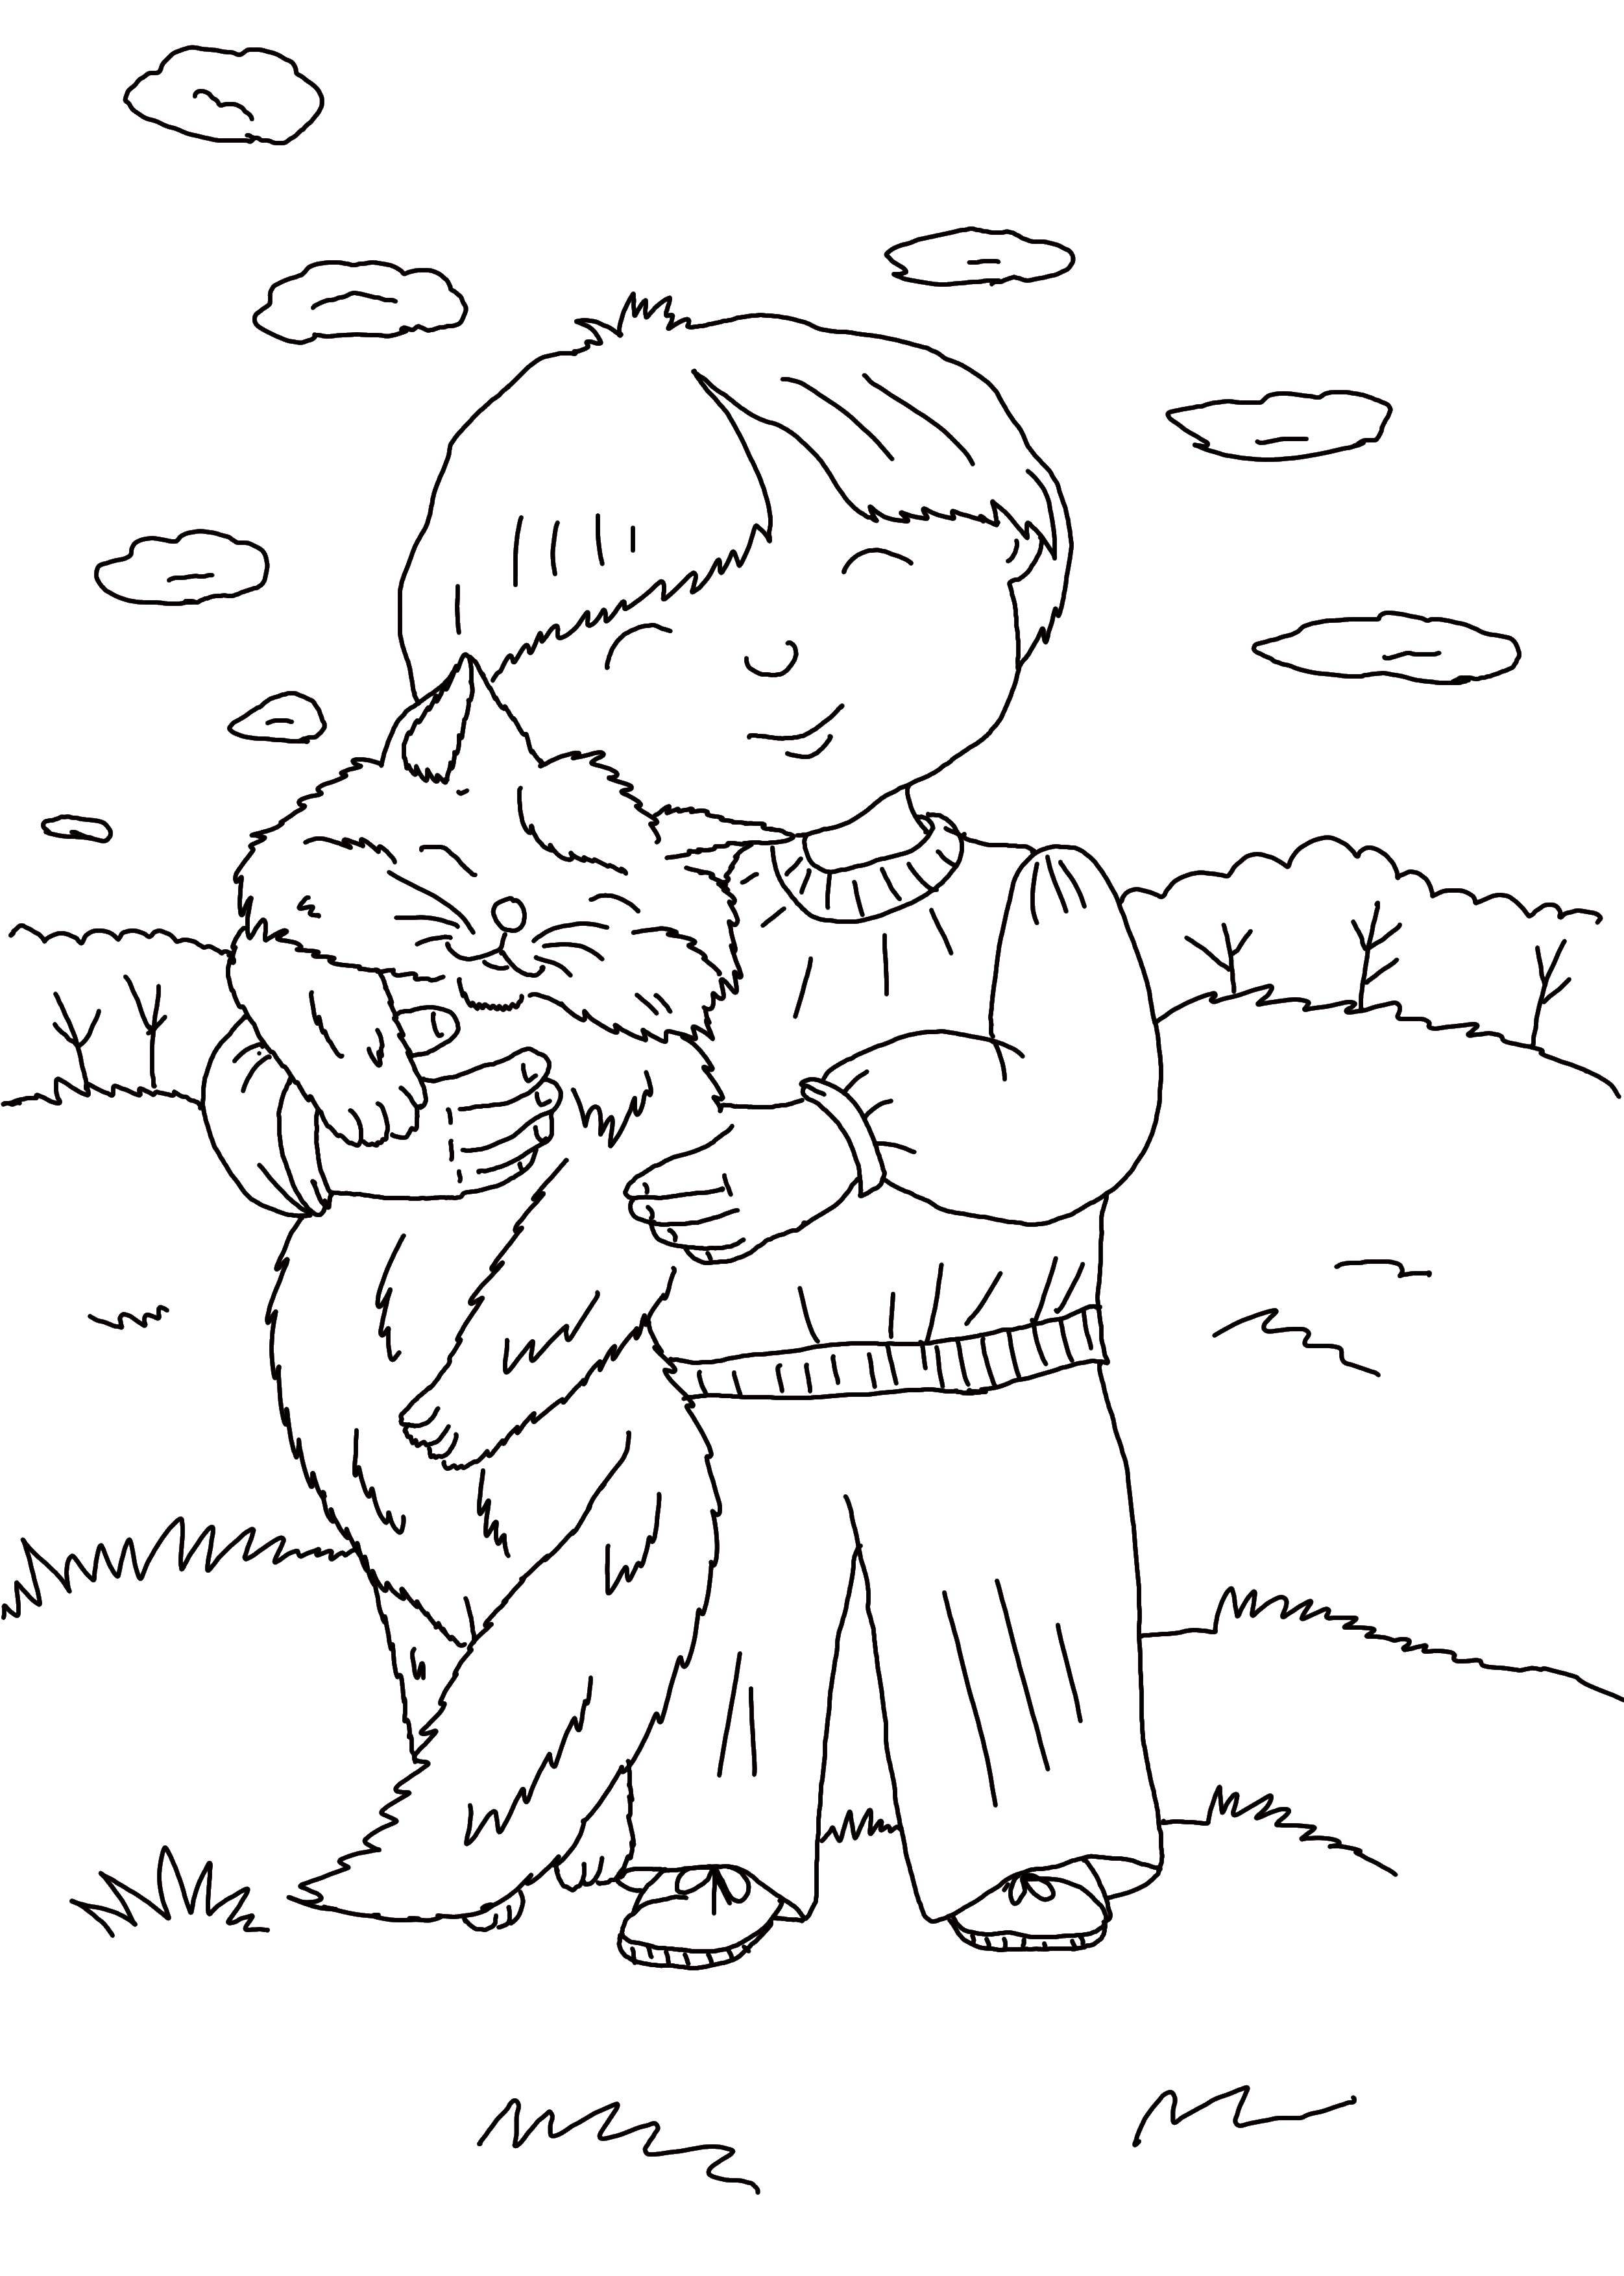 Coloring Boy hugging cat. Category children. Tags:  Boy, cat.